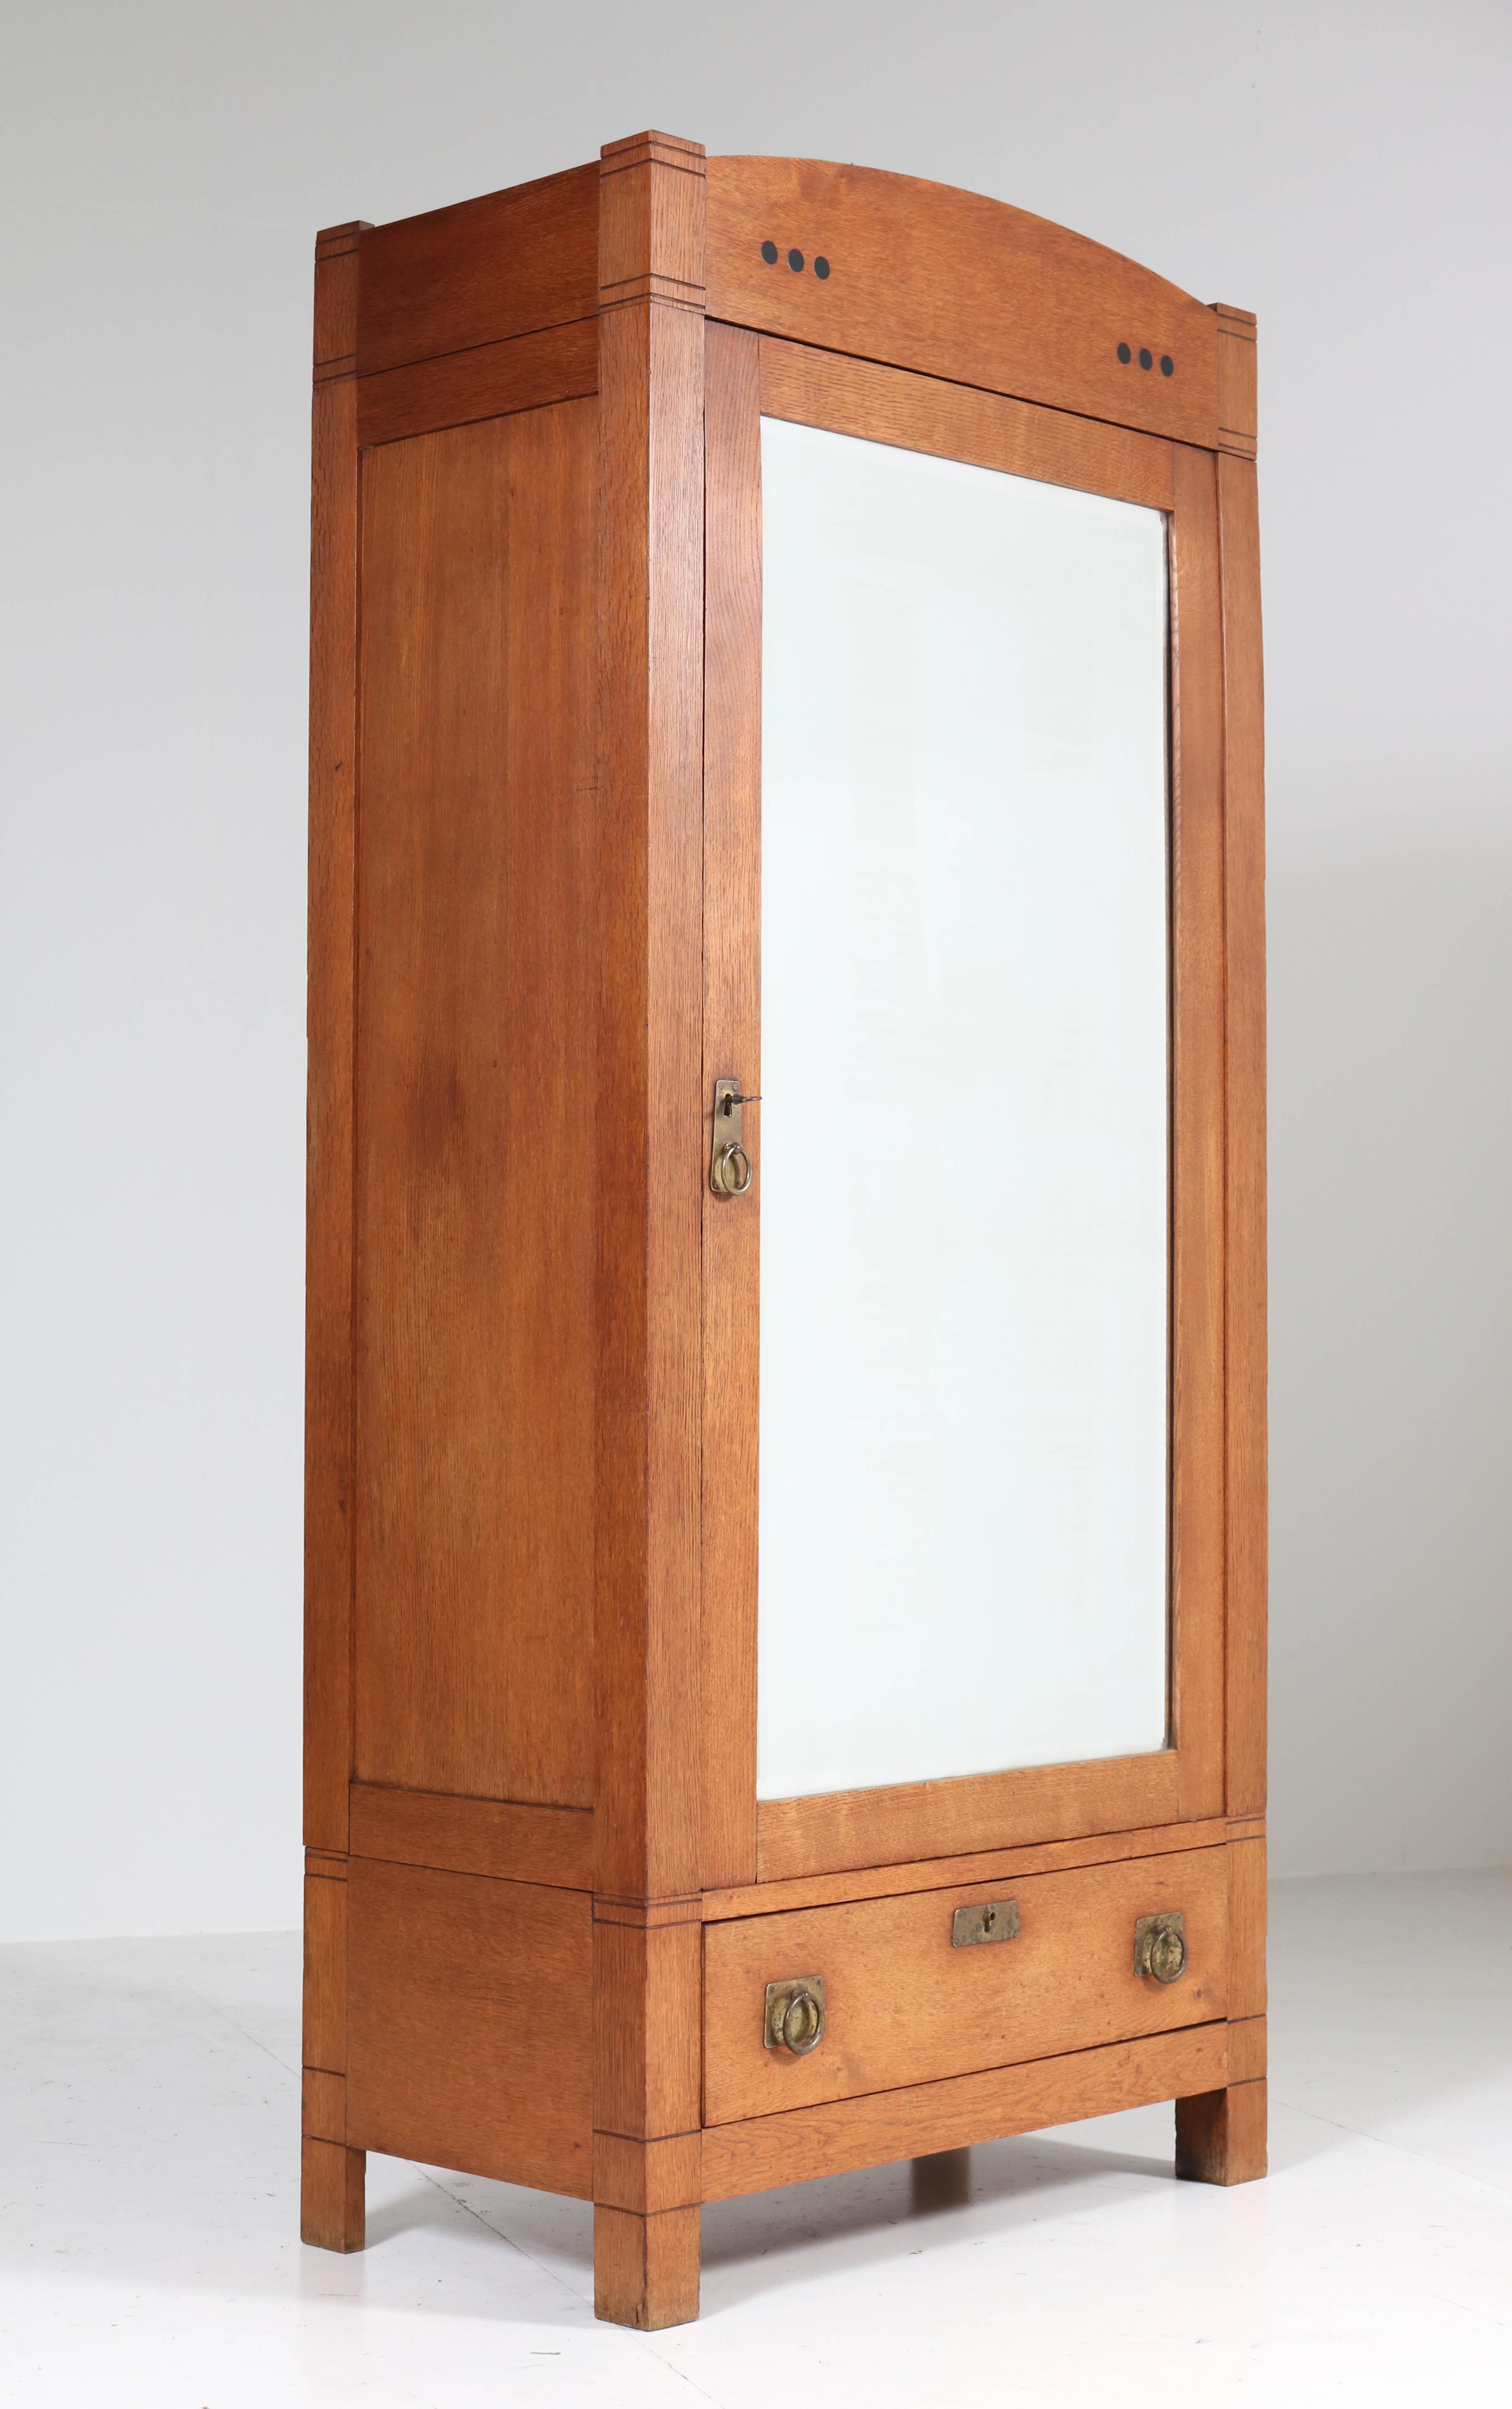 Wonderful Art Nouveau Arts & Crafts armoir or wardrobe.
Striking Dutch design from the 1900s.
Solid oak with original brass handles.
The door has the original beveled glass mirror.
Three wooden shelves, adjustable in height.
This armoir can be